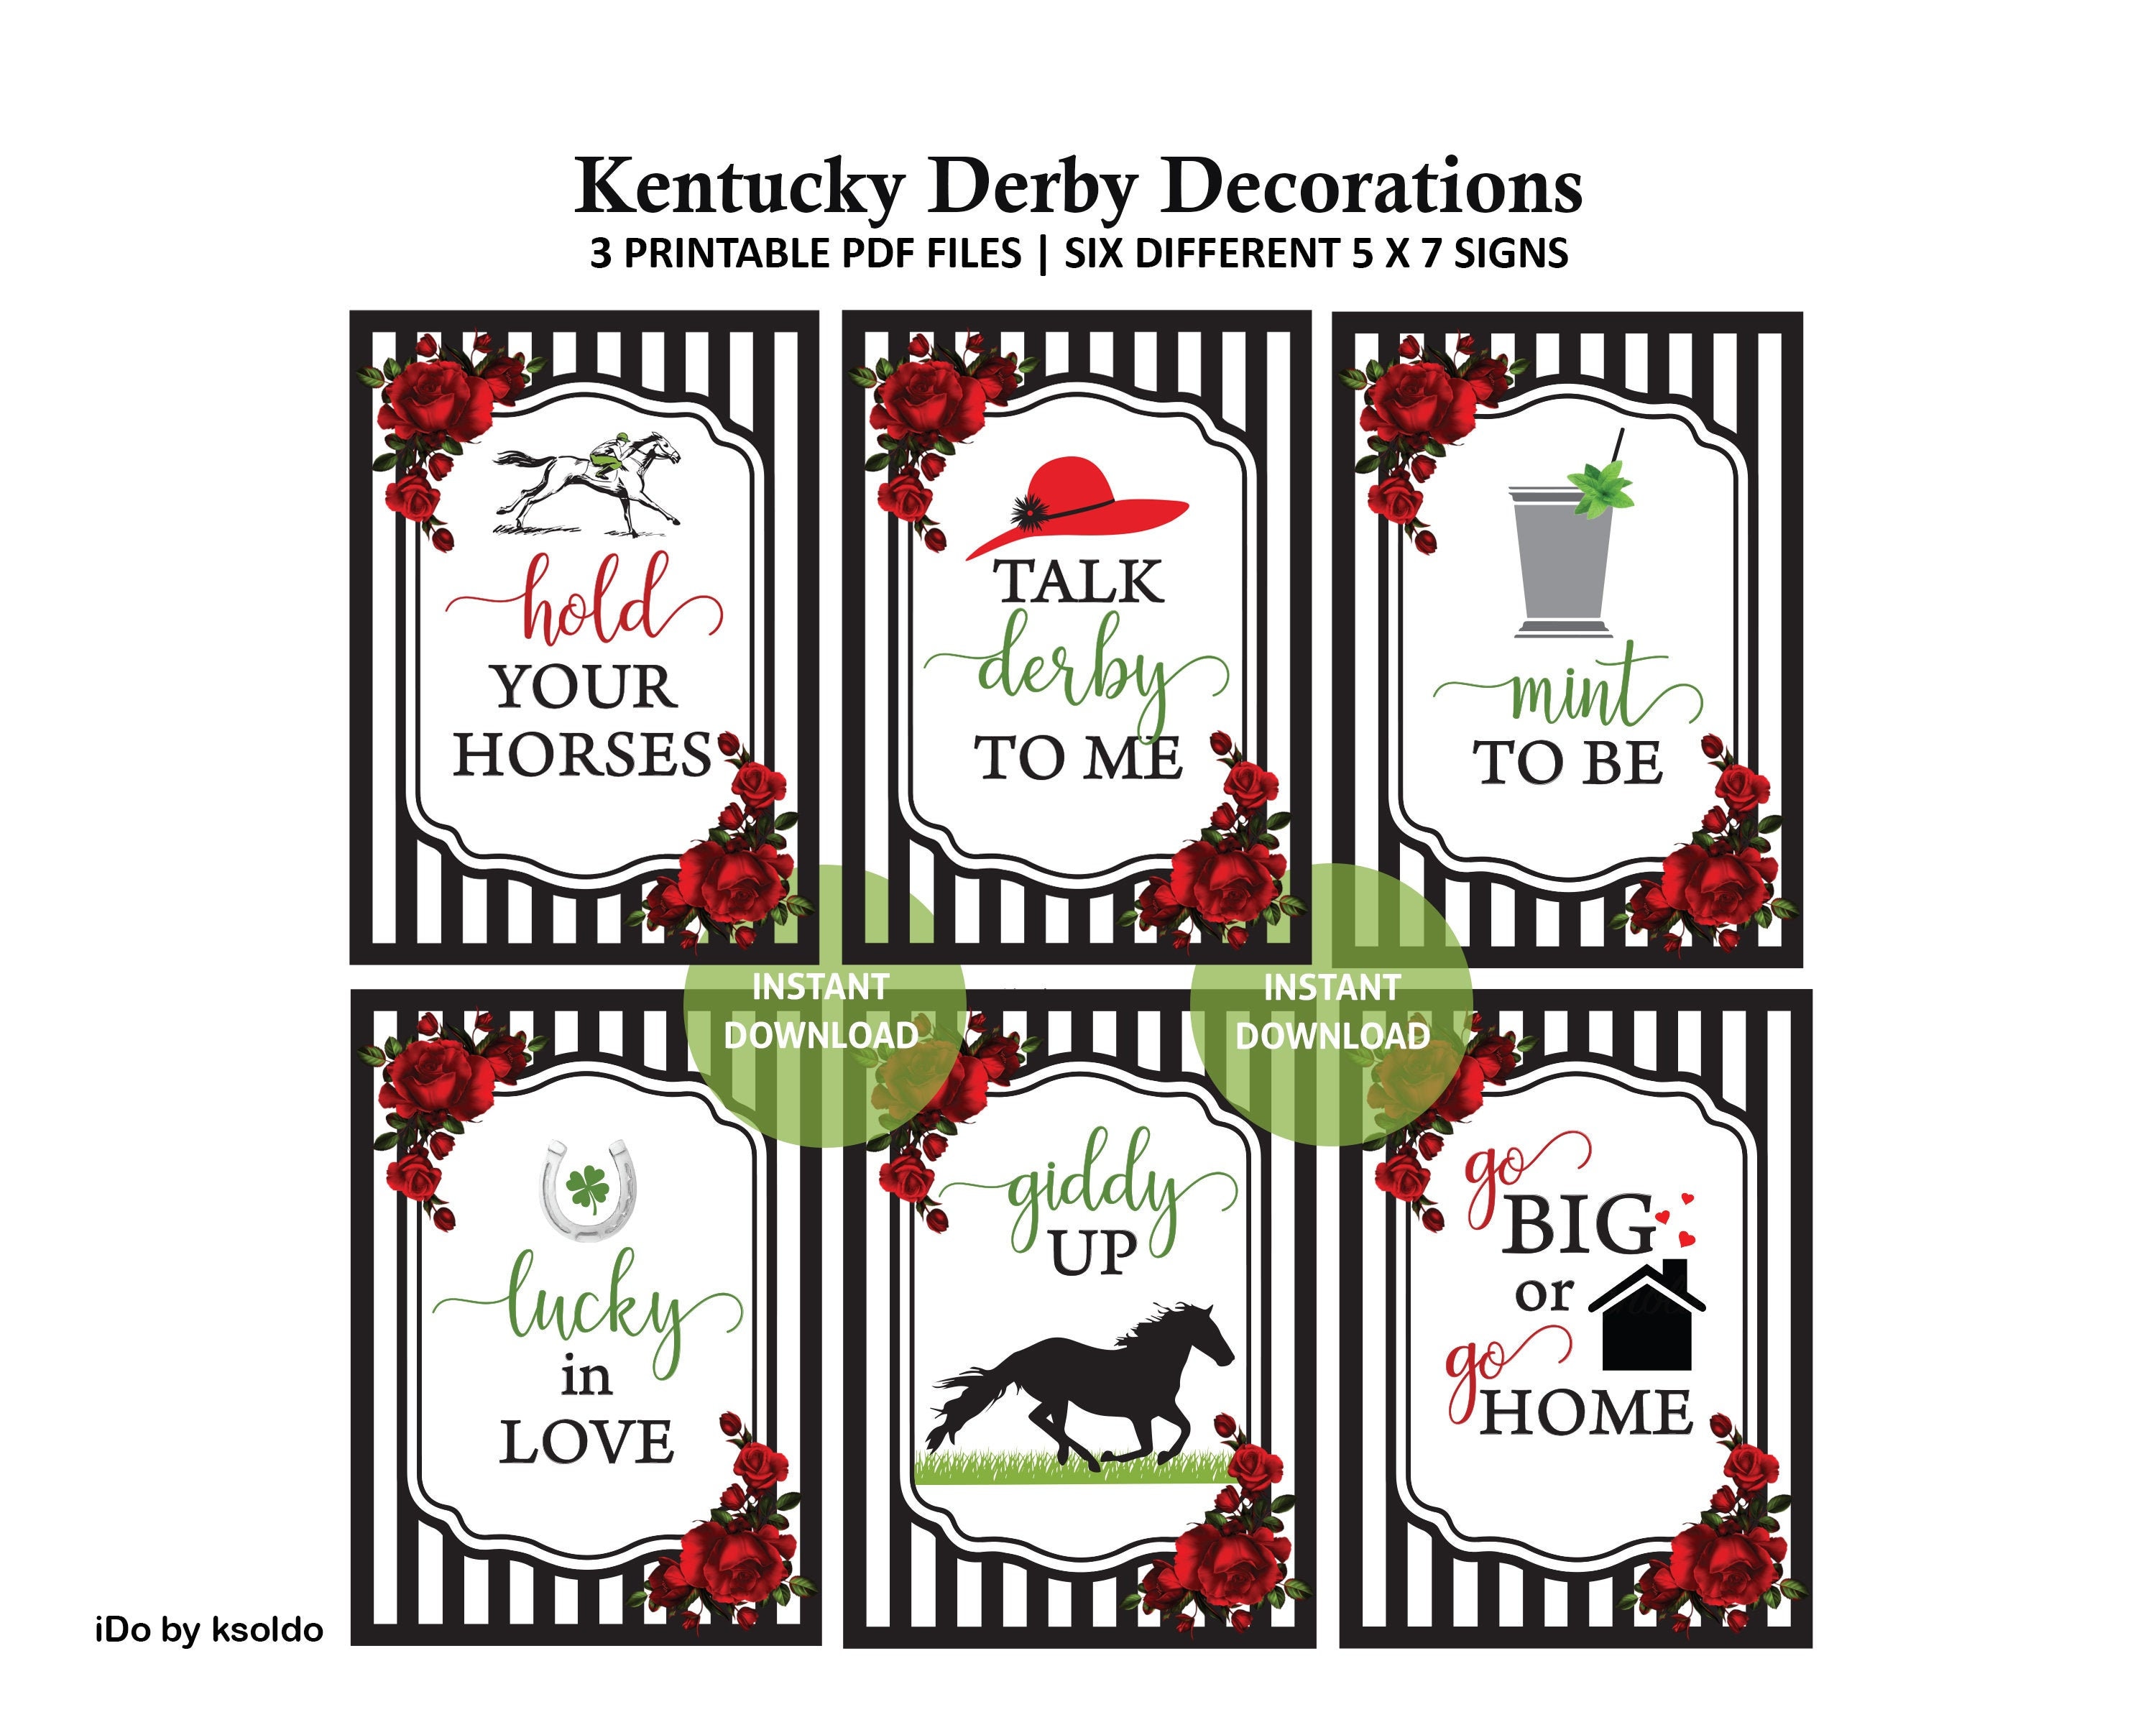 Classic and Fun  Kentucky derby party decorations, Kentucky derby wedding,  Derby party decorations